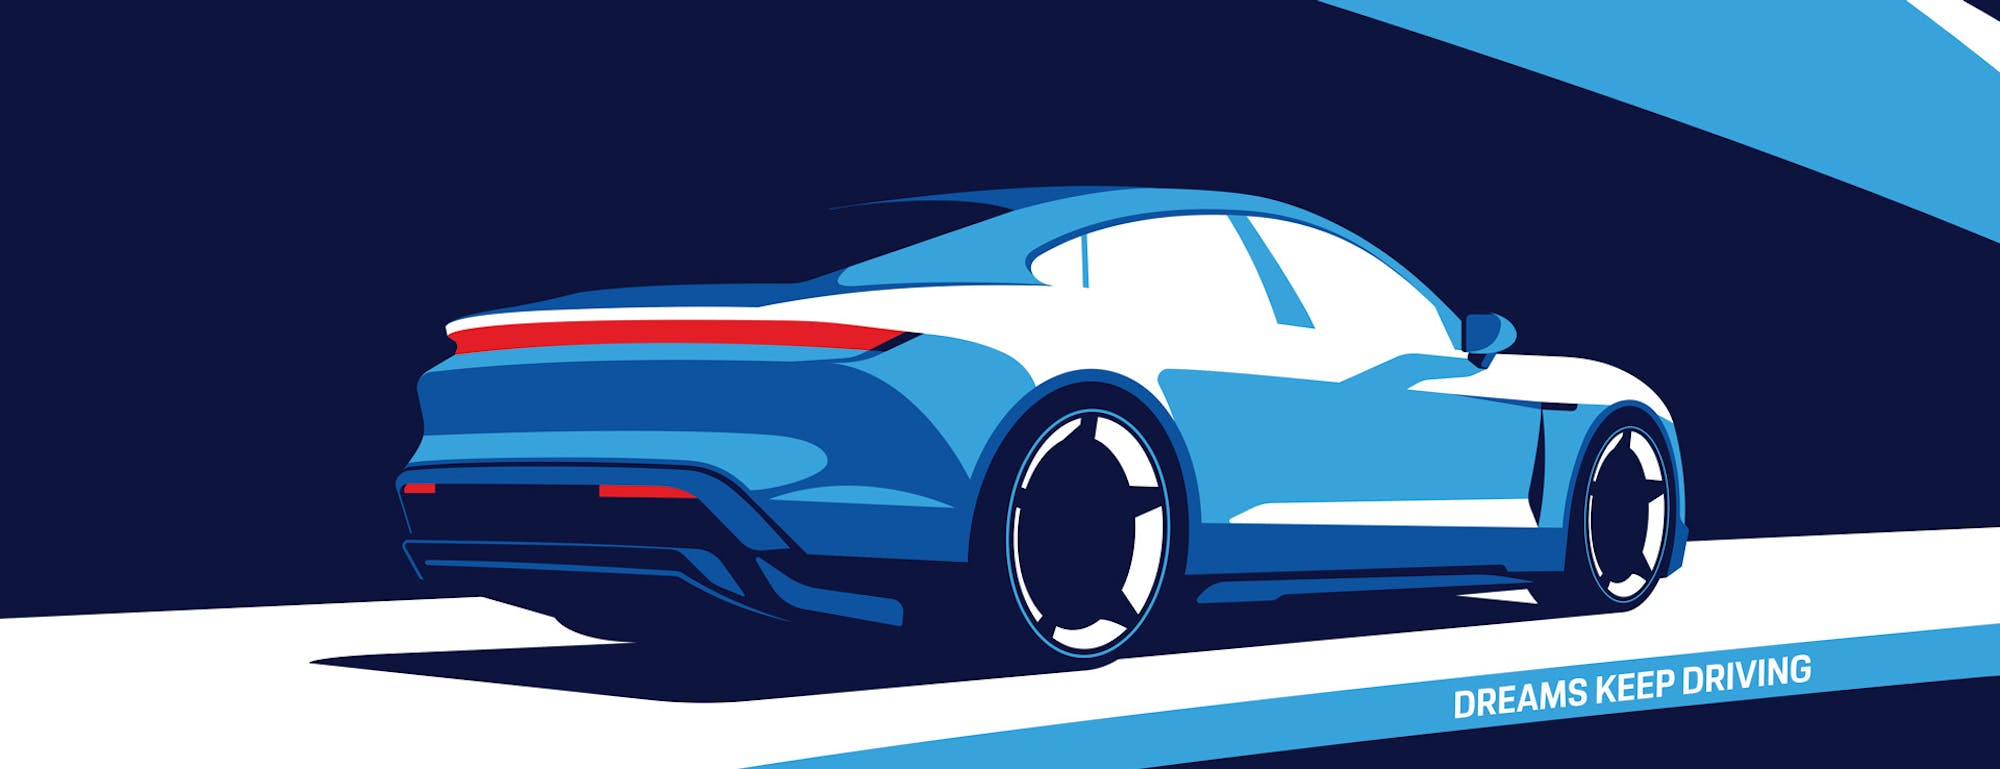 Six blue and red Porsche illustrations on light blue background